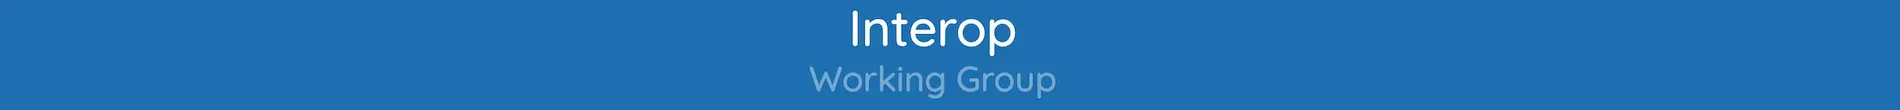 Interop Working Group - DIF